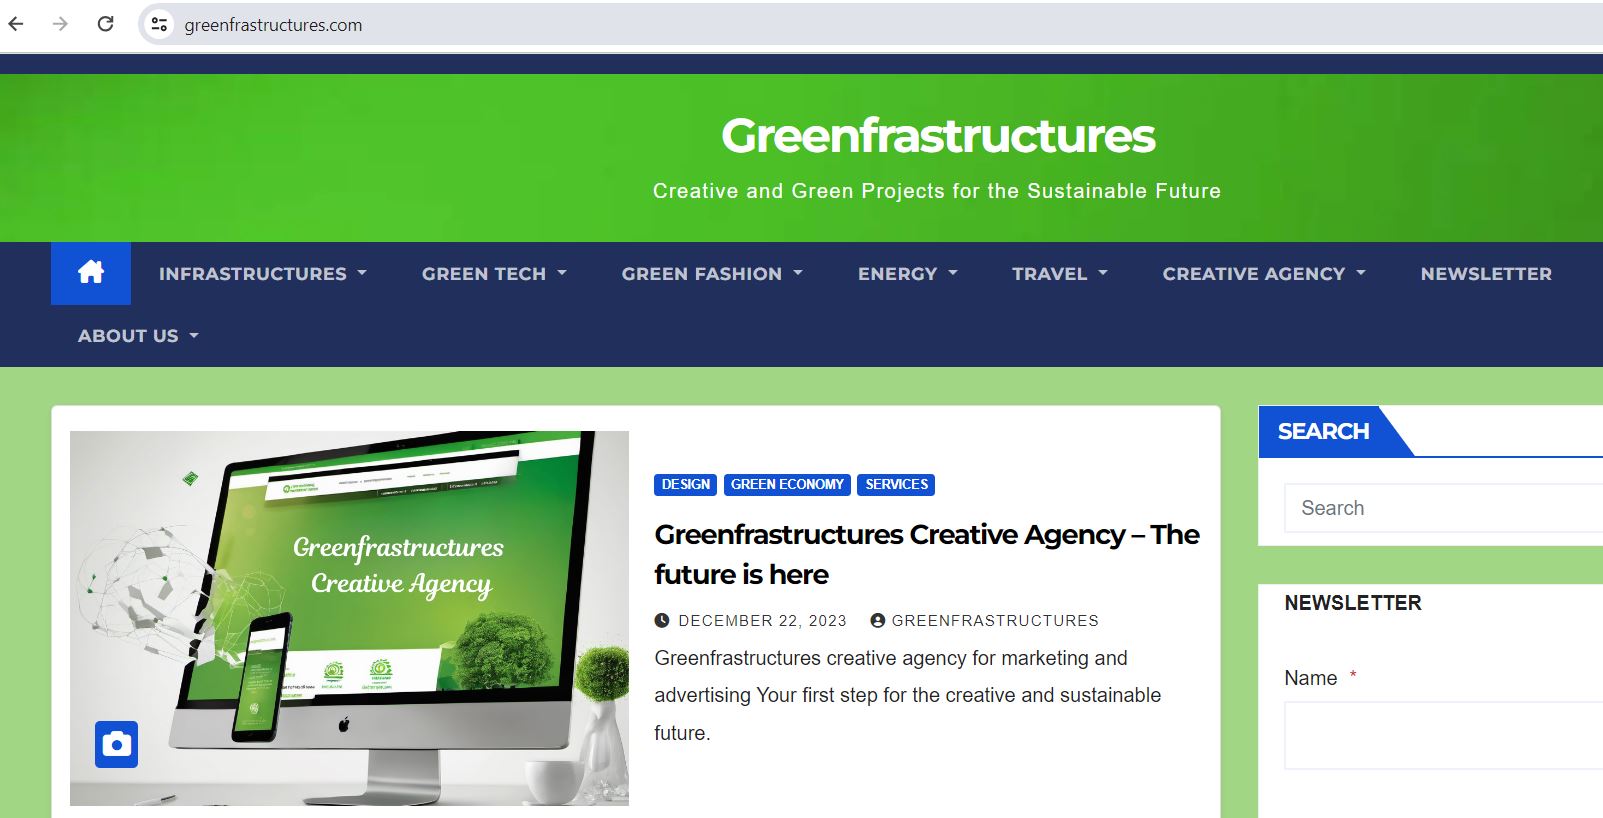 Greenfrastructures Blog ranked in the Top 100 best sustainability blogs on the web.